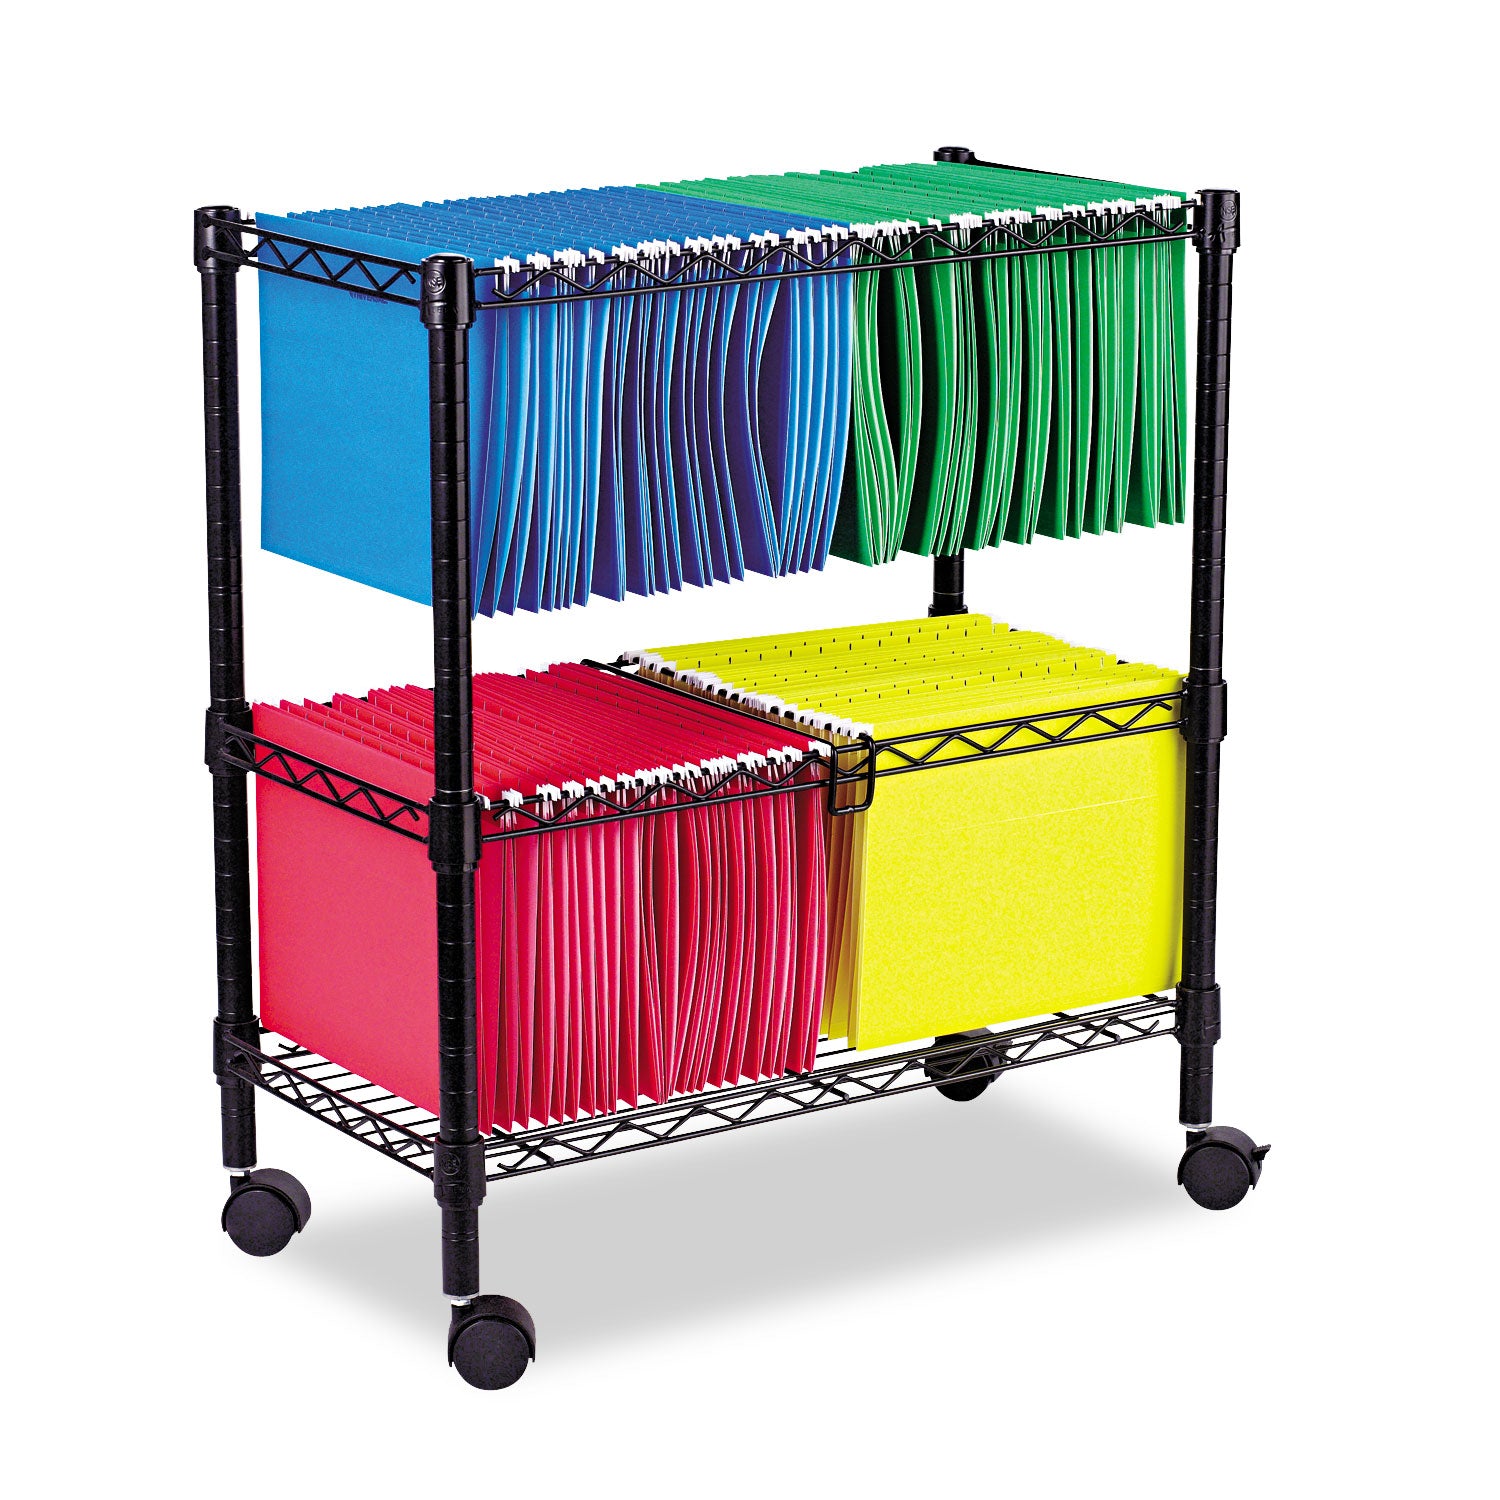 Two-Tier File Cart for Front-to-Back + Side-to-Side Filing, Metal, 1 Shelf, 3 Bins, 26" x 14" x 29.5", Black - 